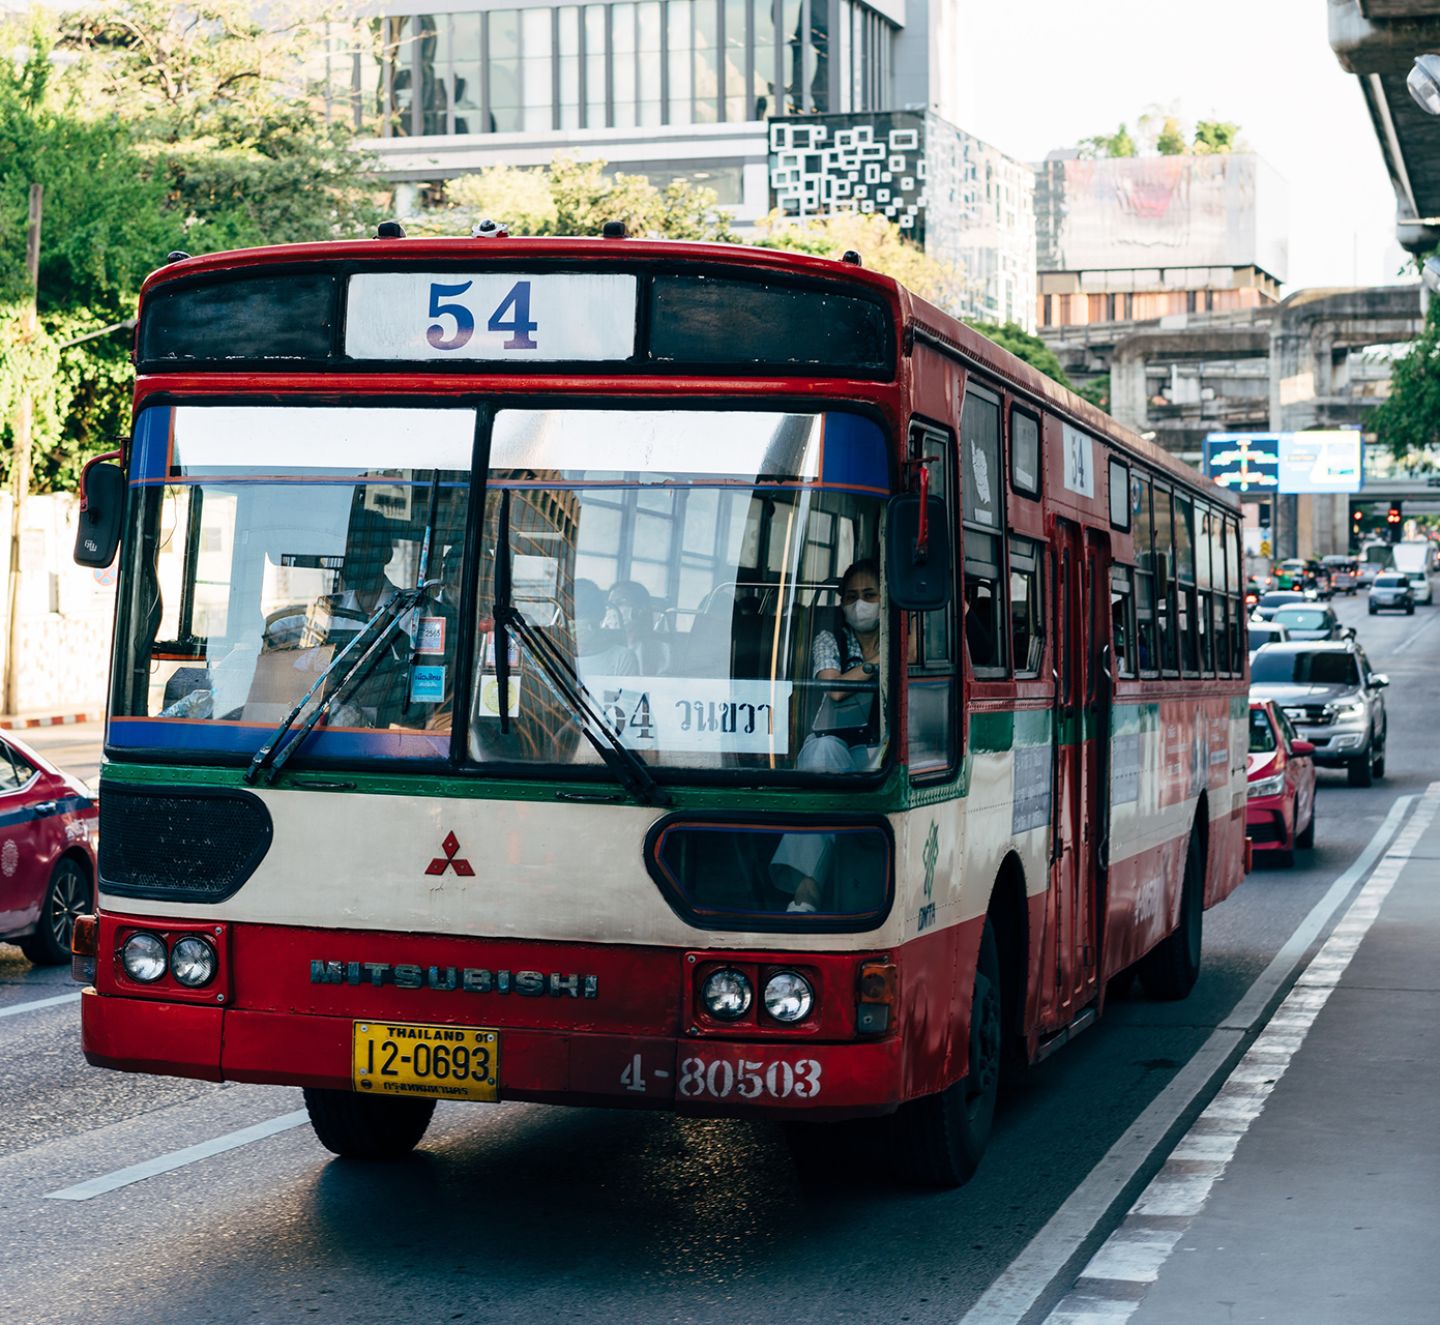 Article 6 and electric buses in Thailand: how carbon markets speed up the net zero transition